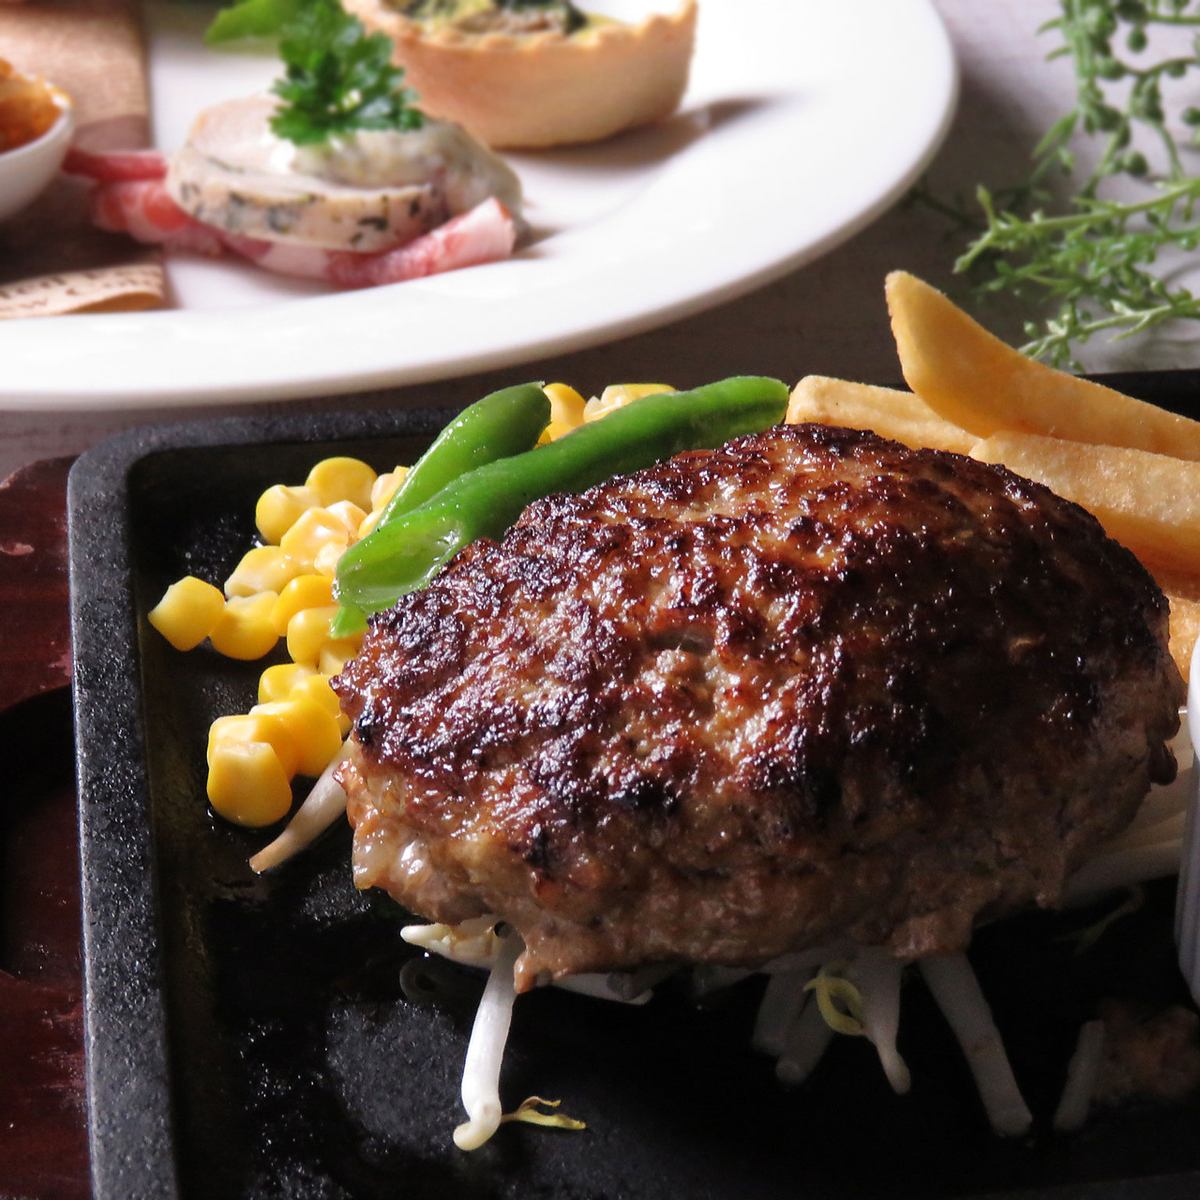 Our prized hamburger steak with a strong garlic flavor